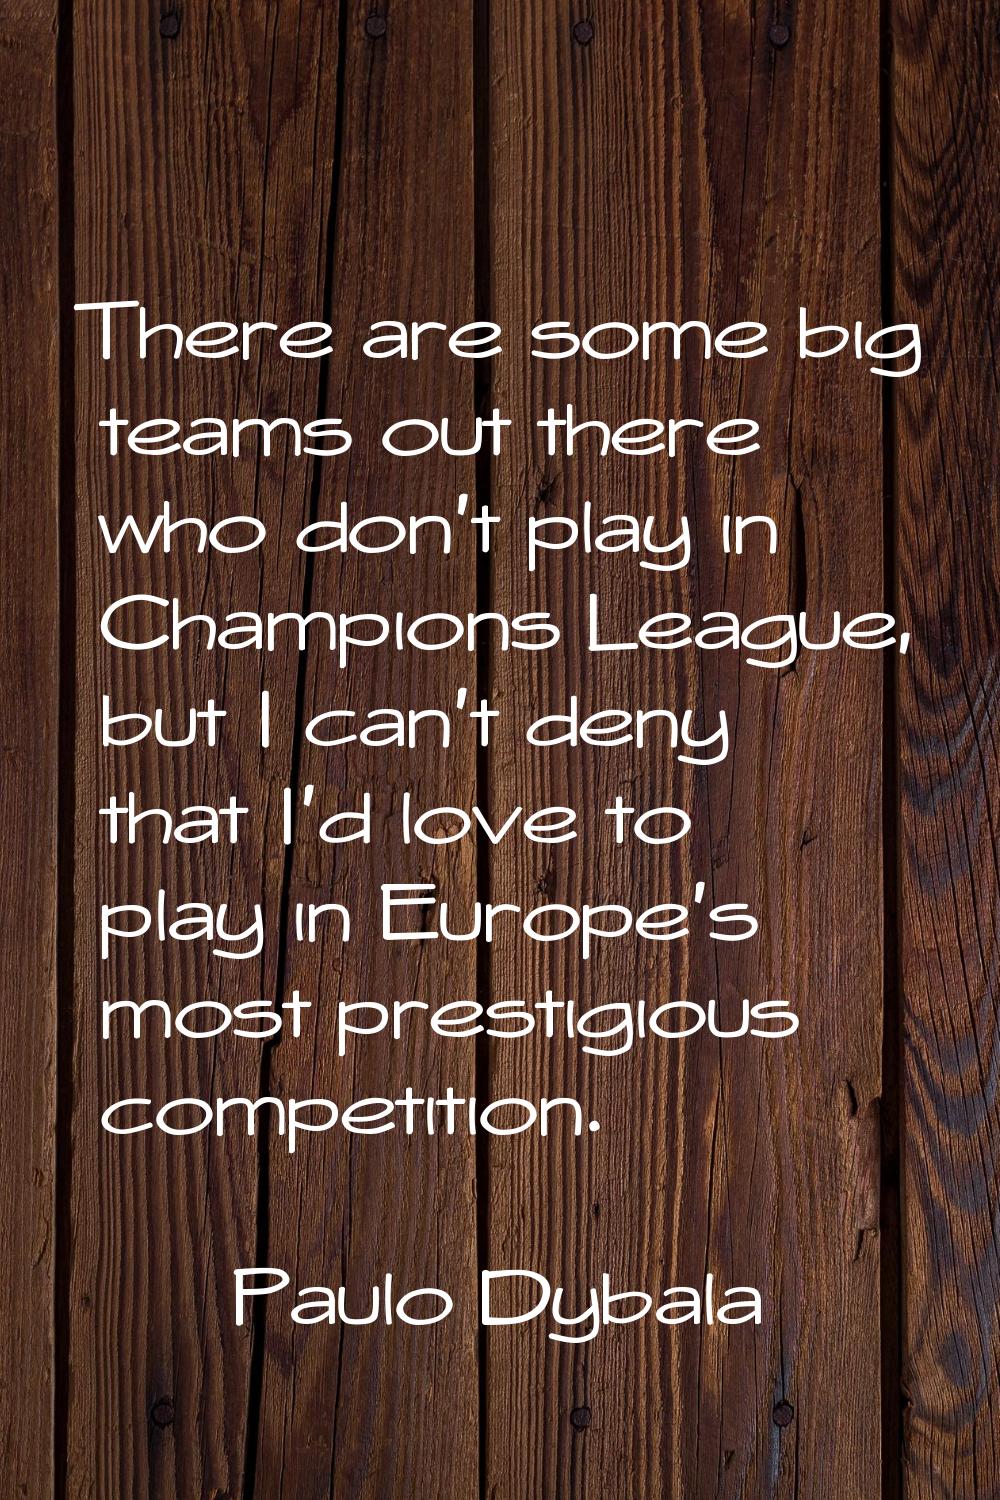 There are some big teams out there who don't play in Champions League, but I can't deny that I'd lo